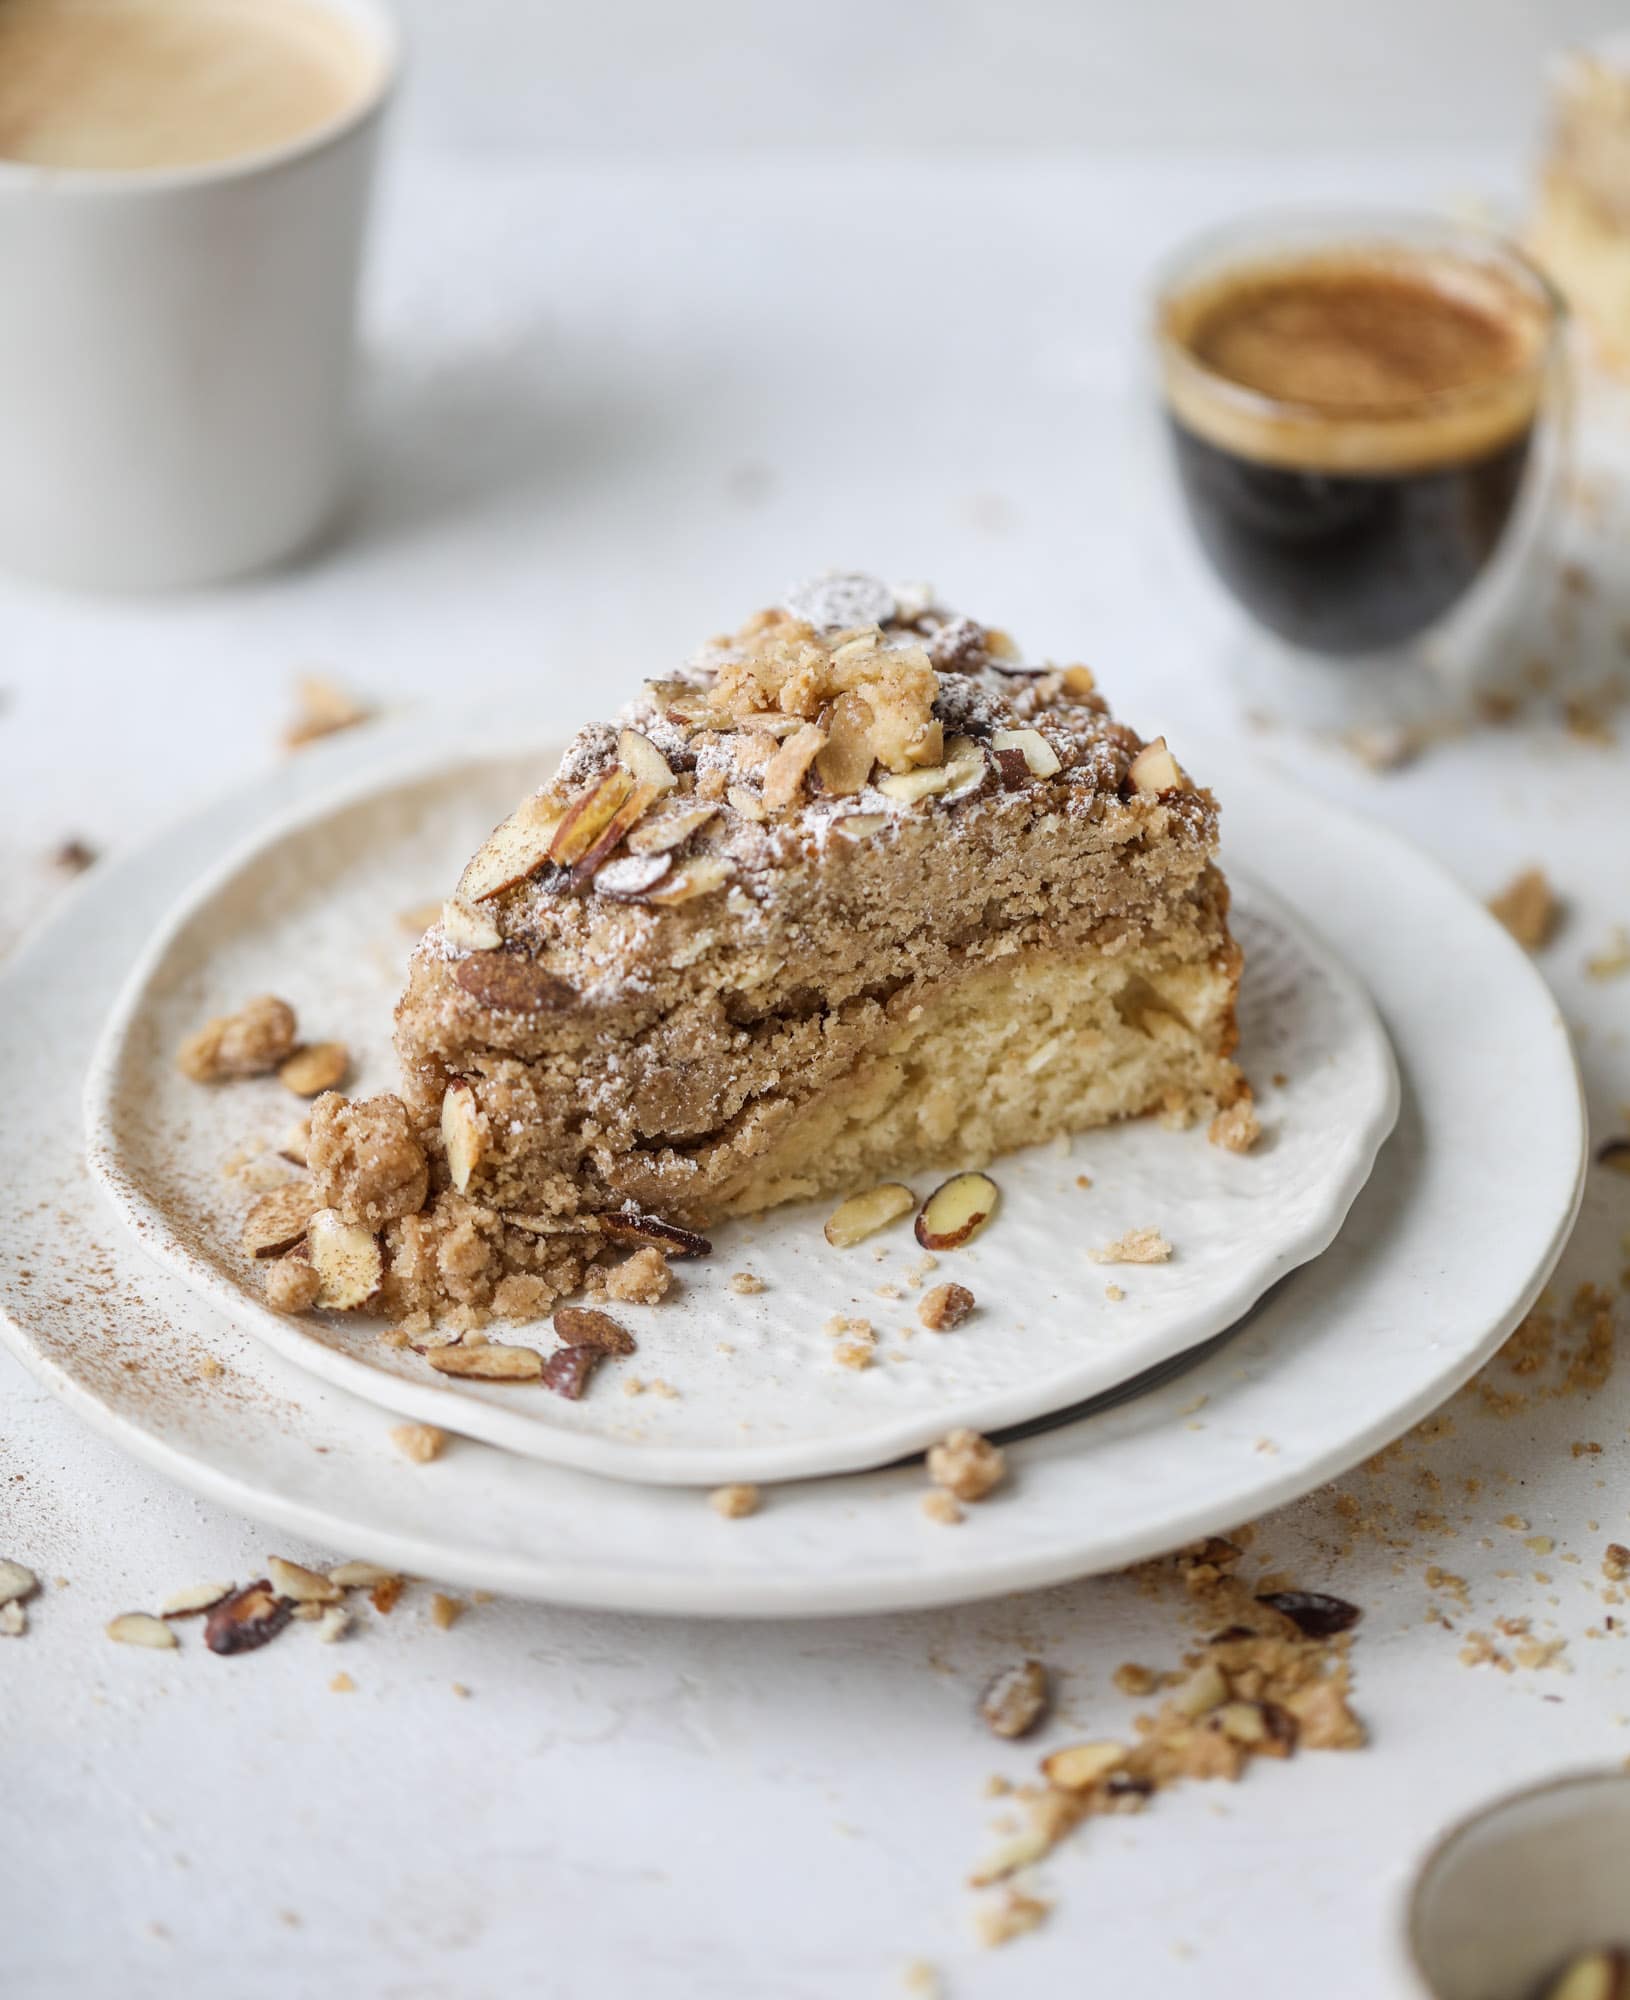 This almond crumb cake is so delicious and perfect for breakfast or dessert! It's full of delicious almond flavor and crunch and the crumb on top is so thick and perfect. It's like an almond croissant on steroids. I howsweeteats.com #almond #crumb #cake